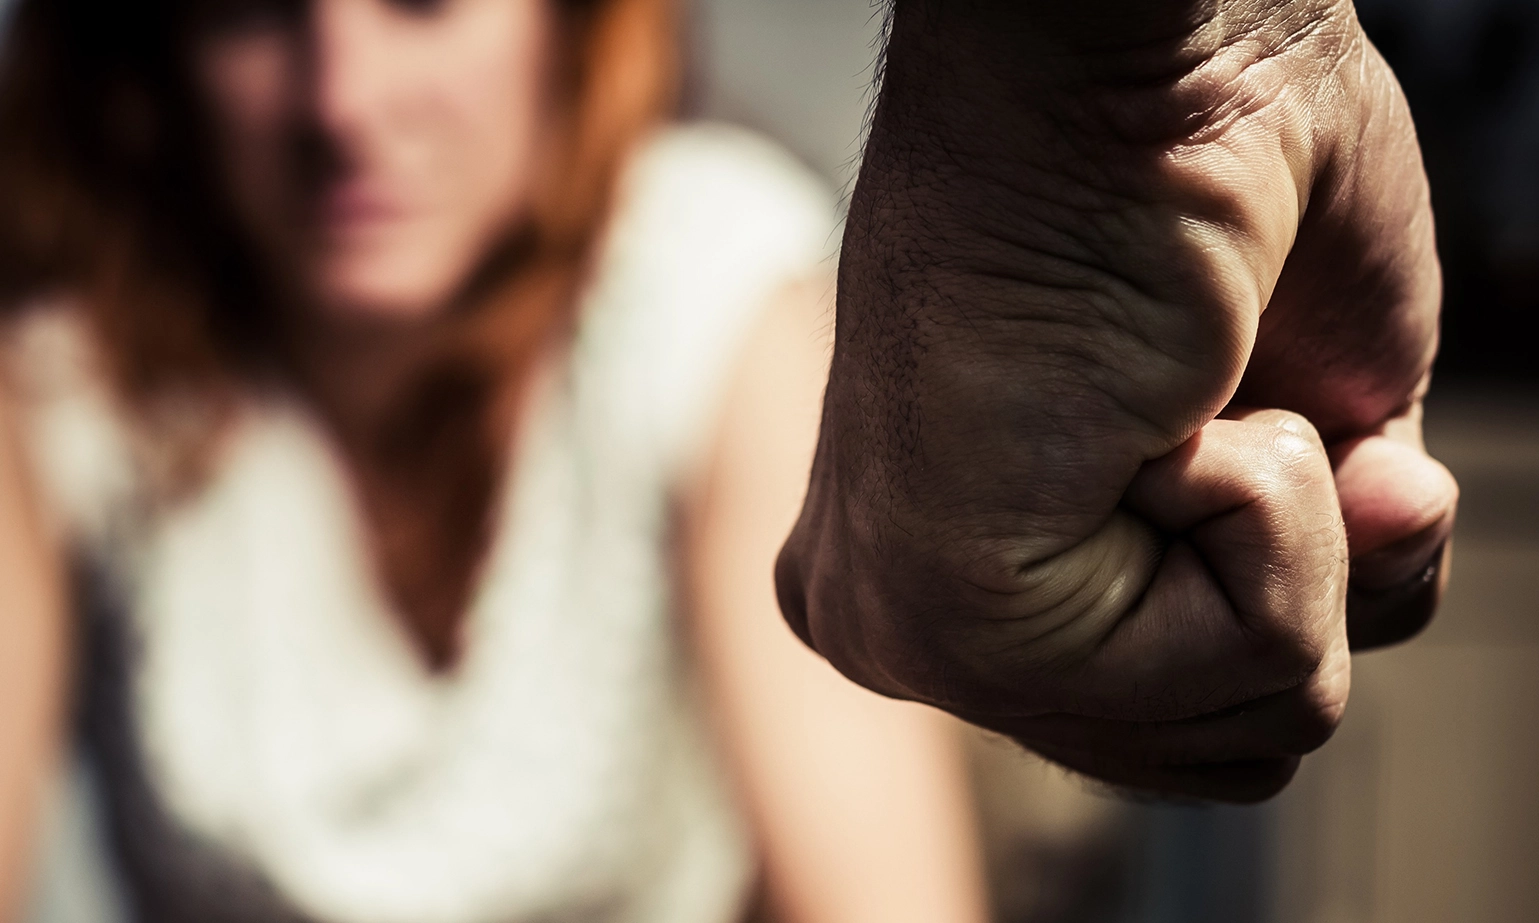 What to Do if Someone You Know is a Victim of Domestic Violence?